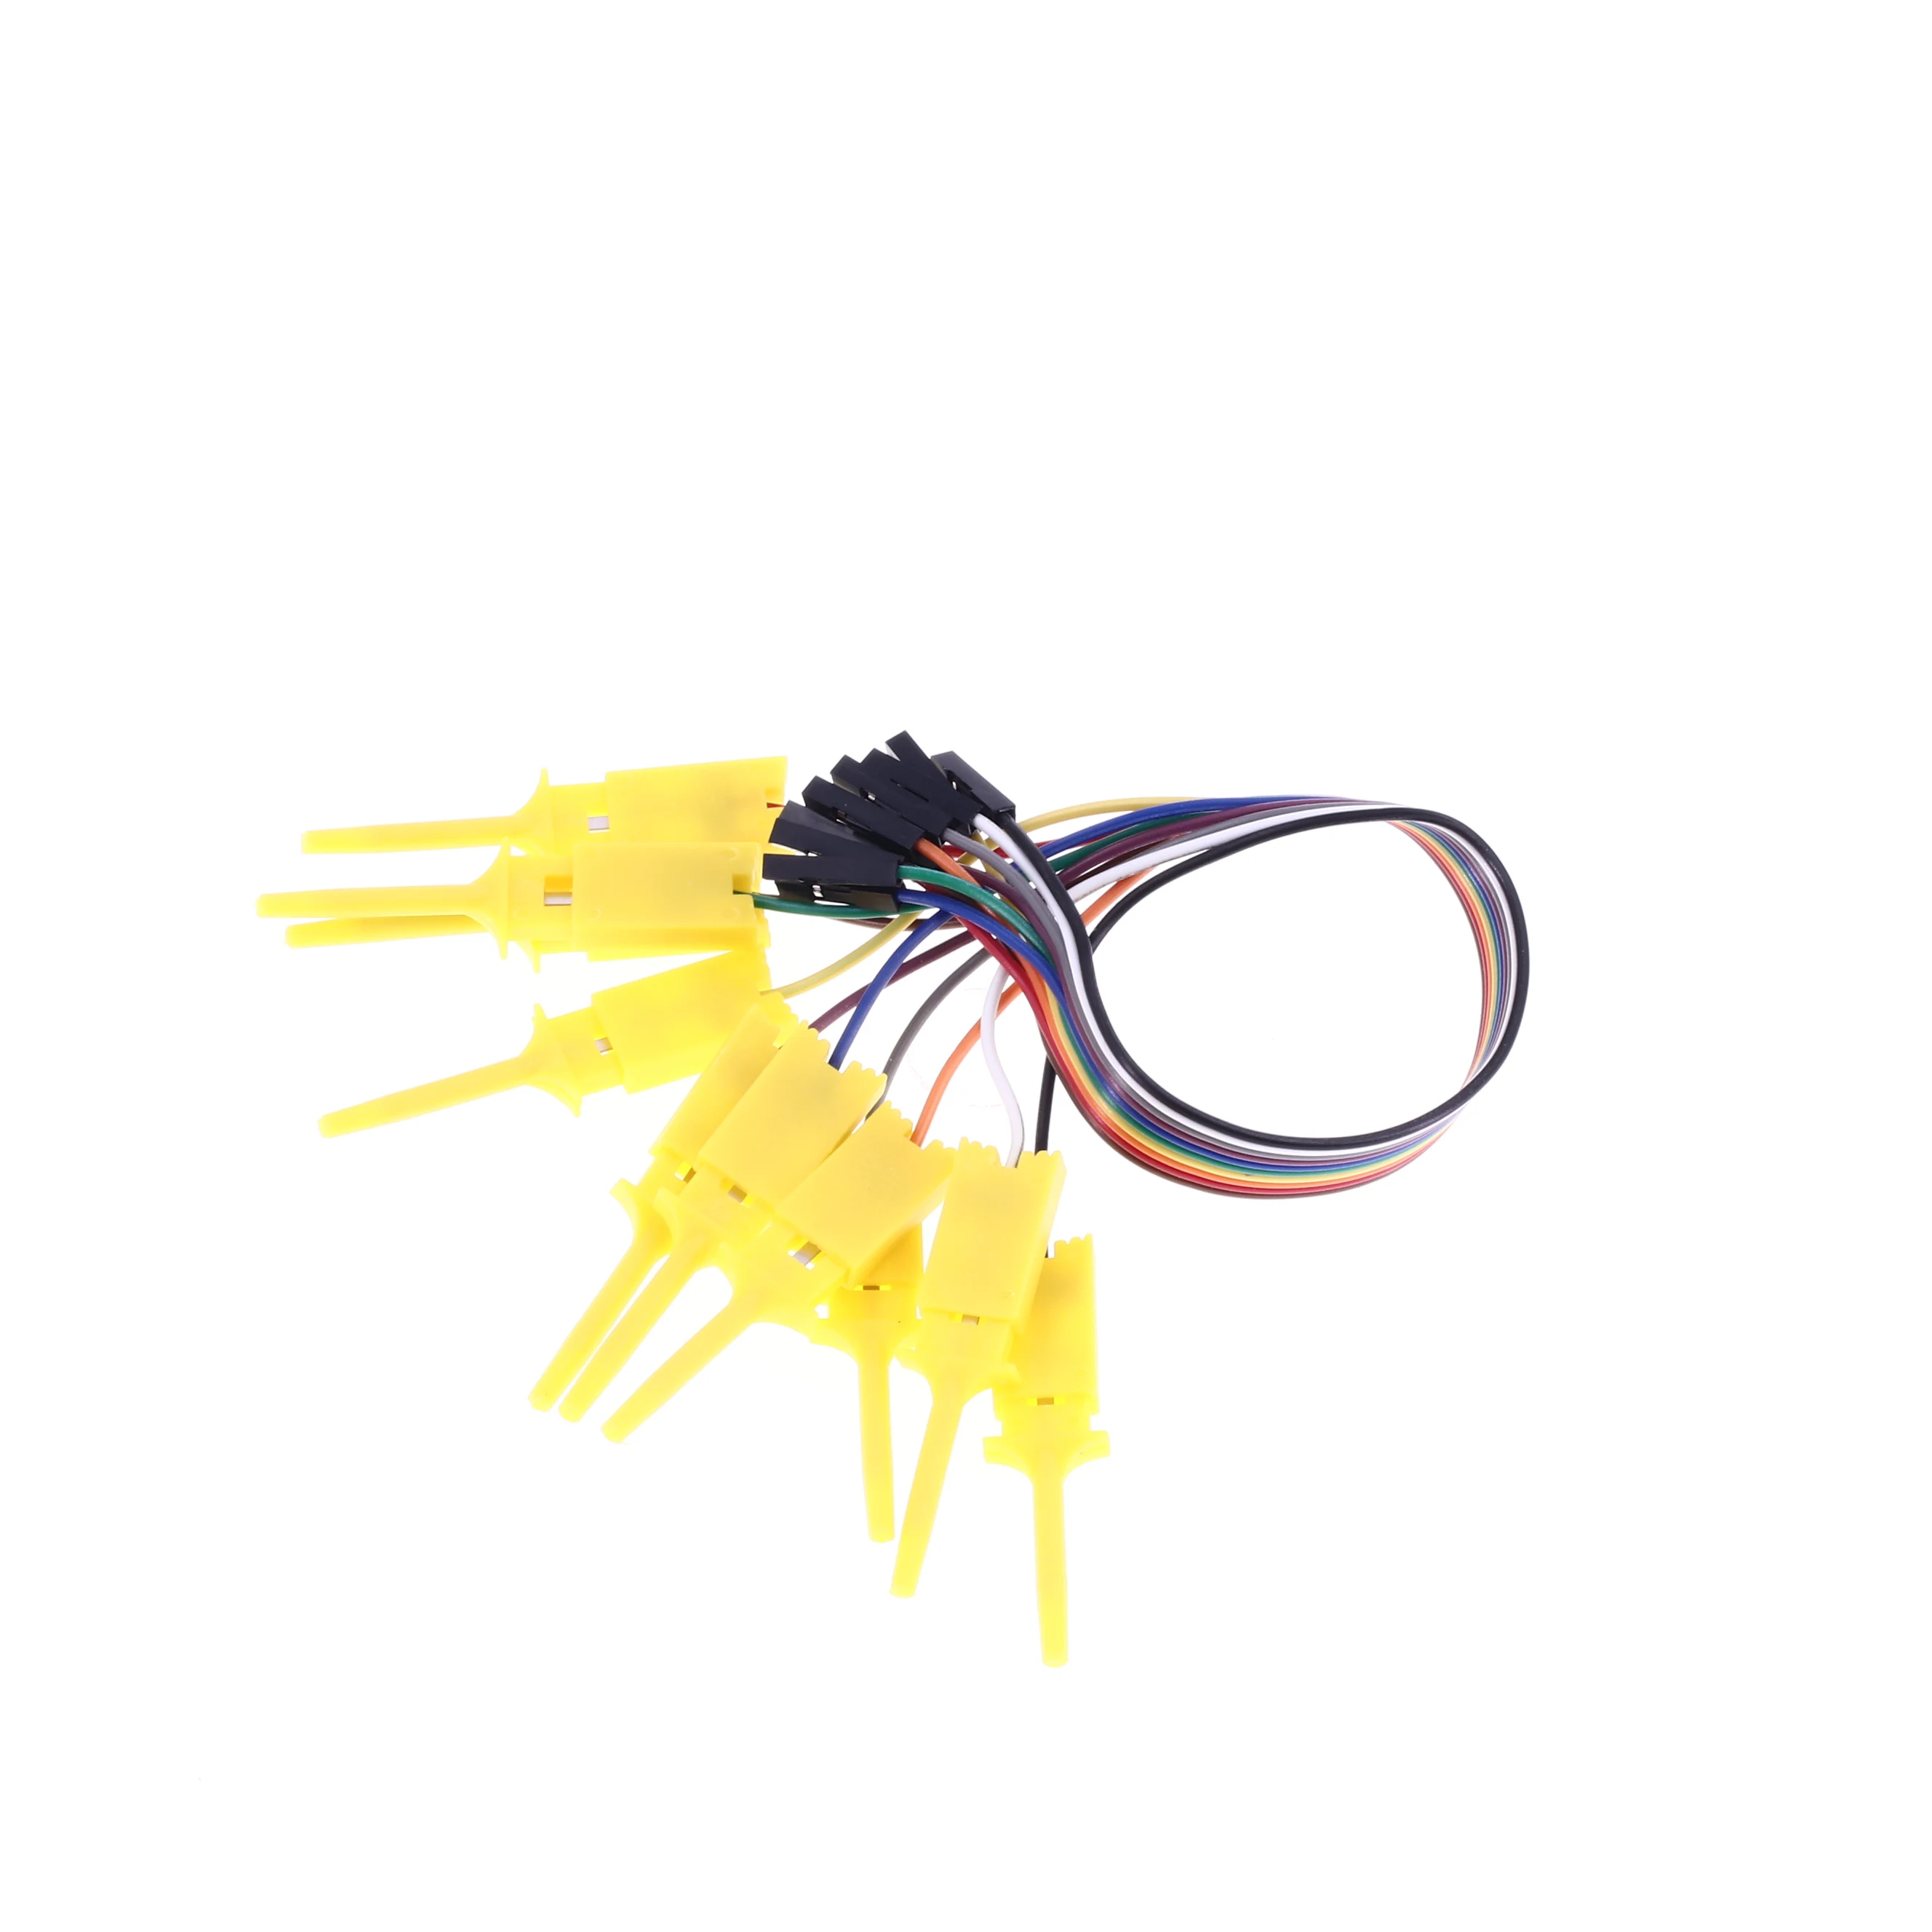 10pcs 300mm High Efficiency Test Hook Clip Logic Analyzer Cable Gripper Probe Test Clamp Kit Yellow/Red/Black/Green